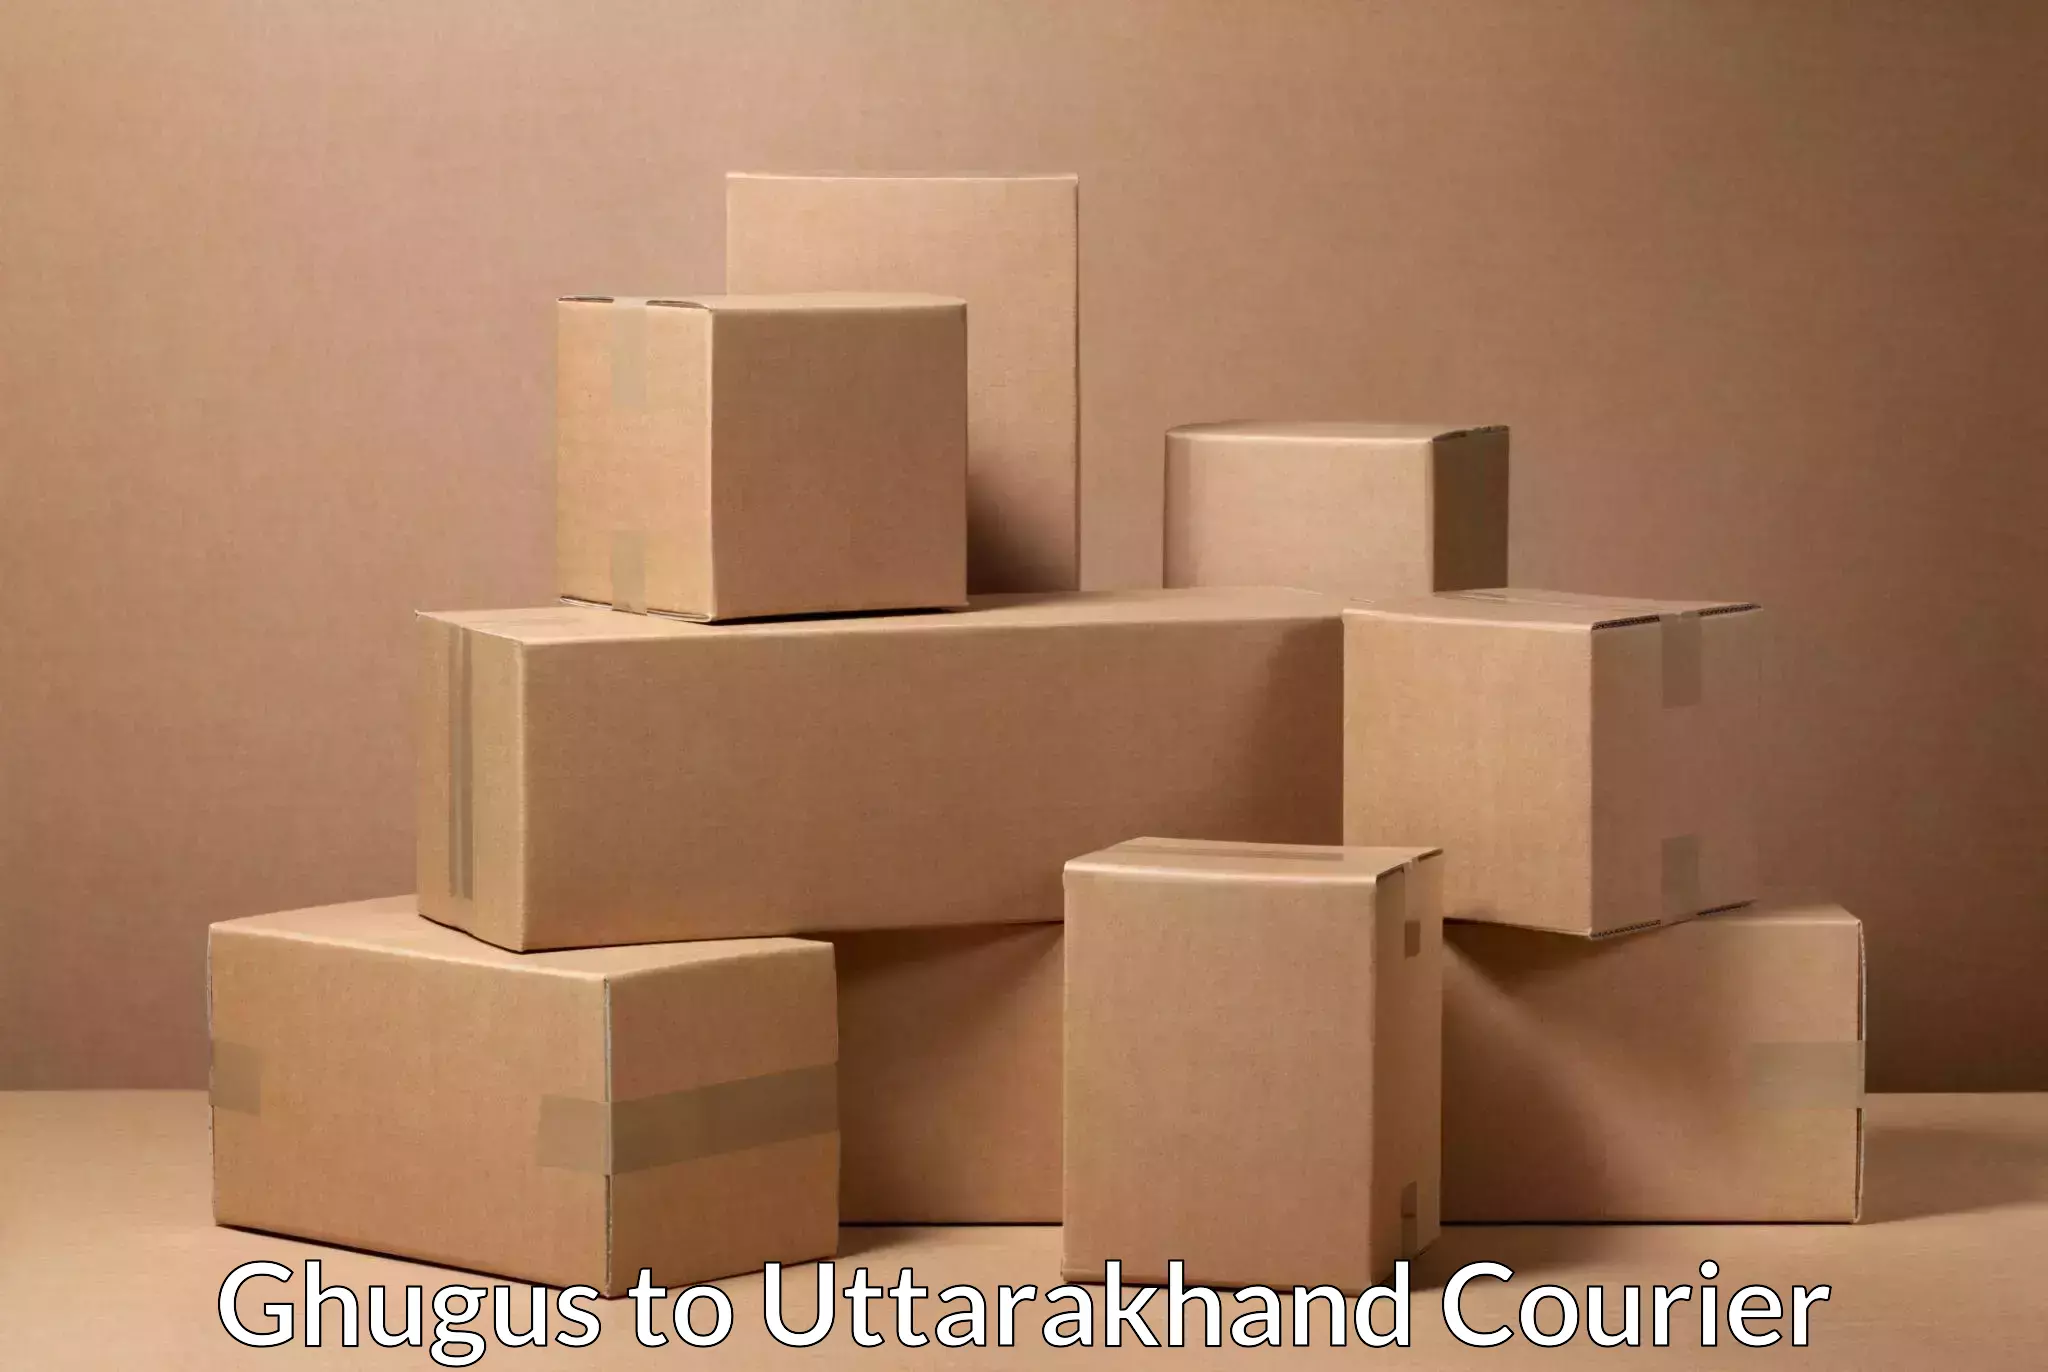 Package consolidation Ghugus to Uttarakhand